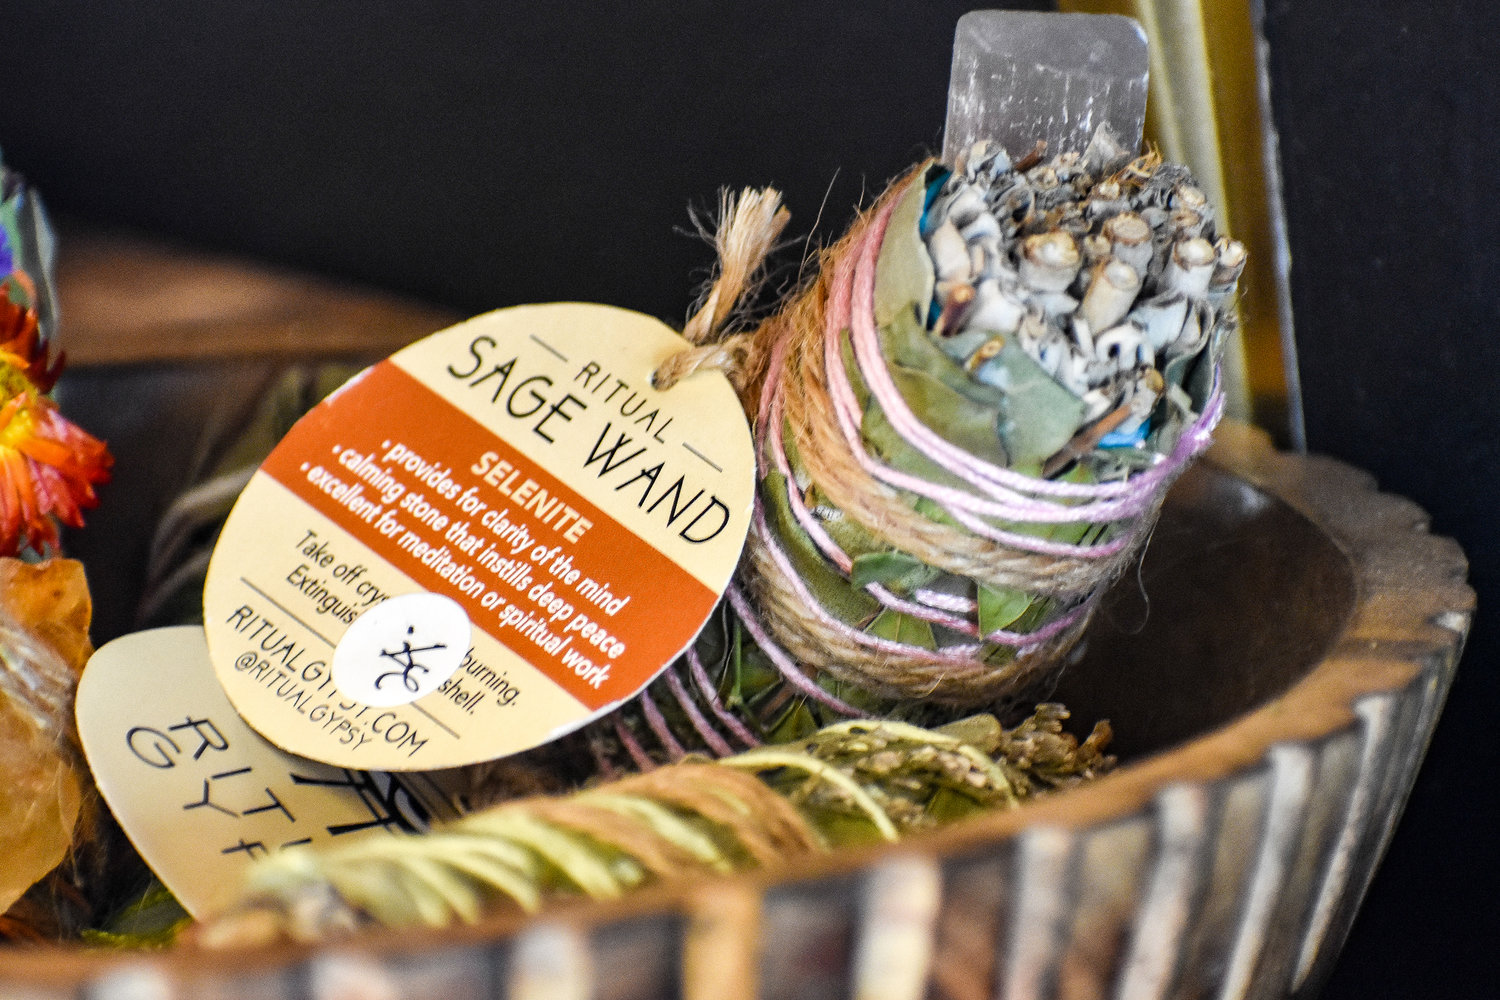 This sage wand and other natural products are available at The Magical Muse.